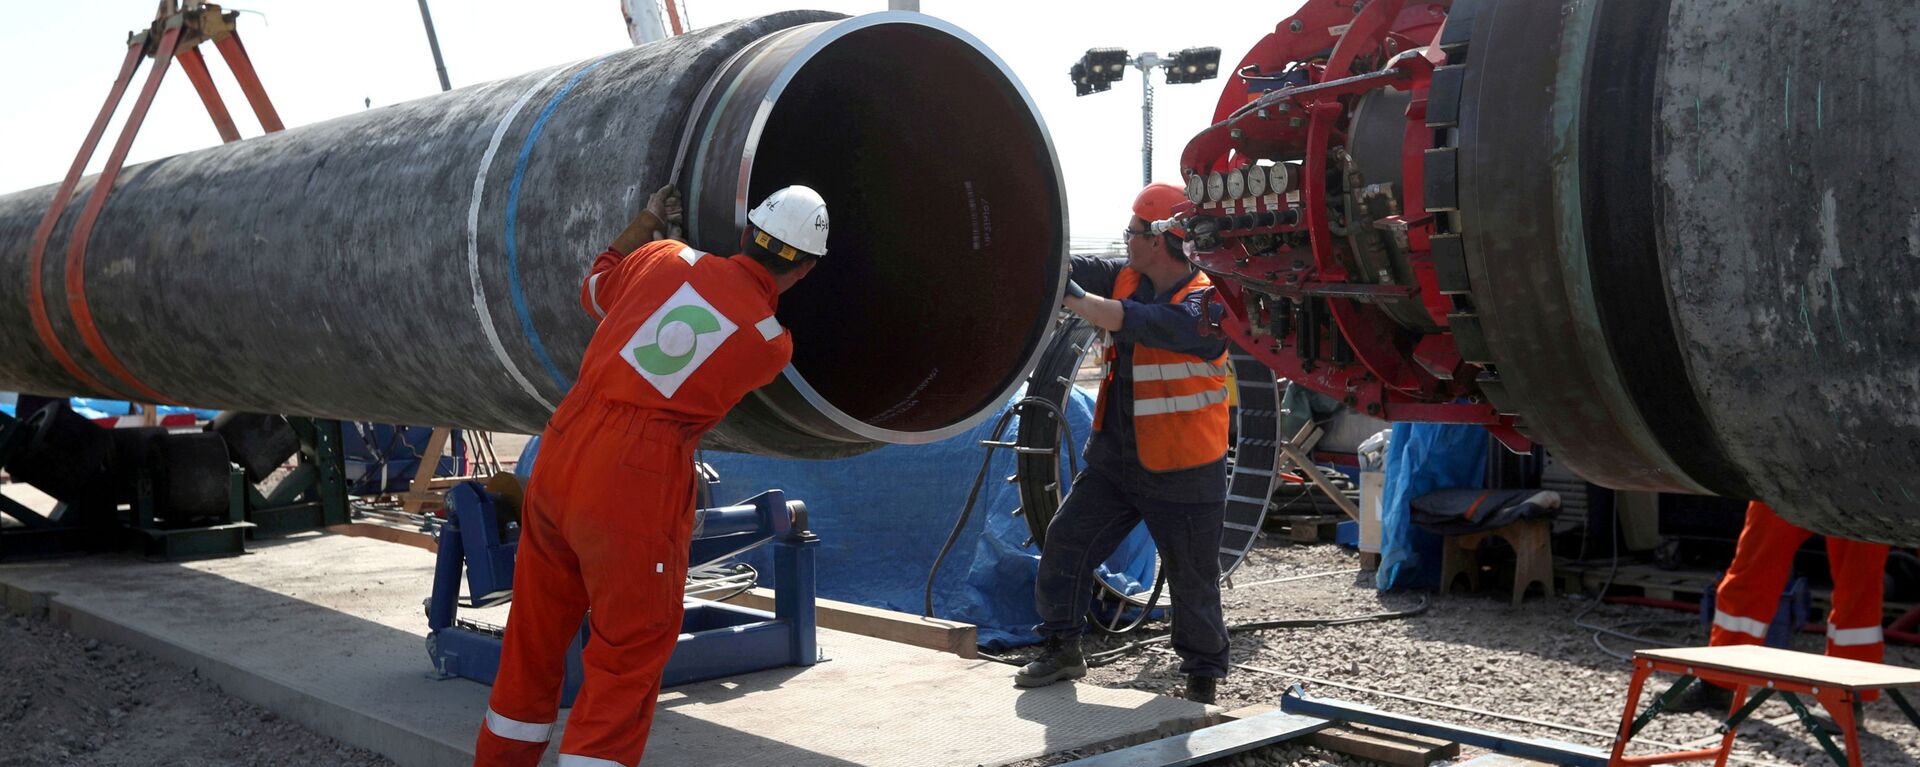 FILE PHOTO: Workers are seen at the construction site of the Nord Stream 2 gas pipeline, near the town of Kingisepp, Leningrad region, Russia, June 5, 2019 - Sputnik International, 1920, 20.08.2021